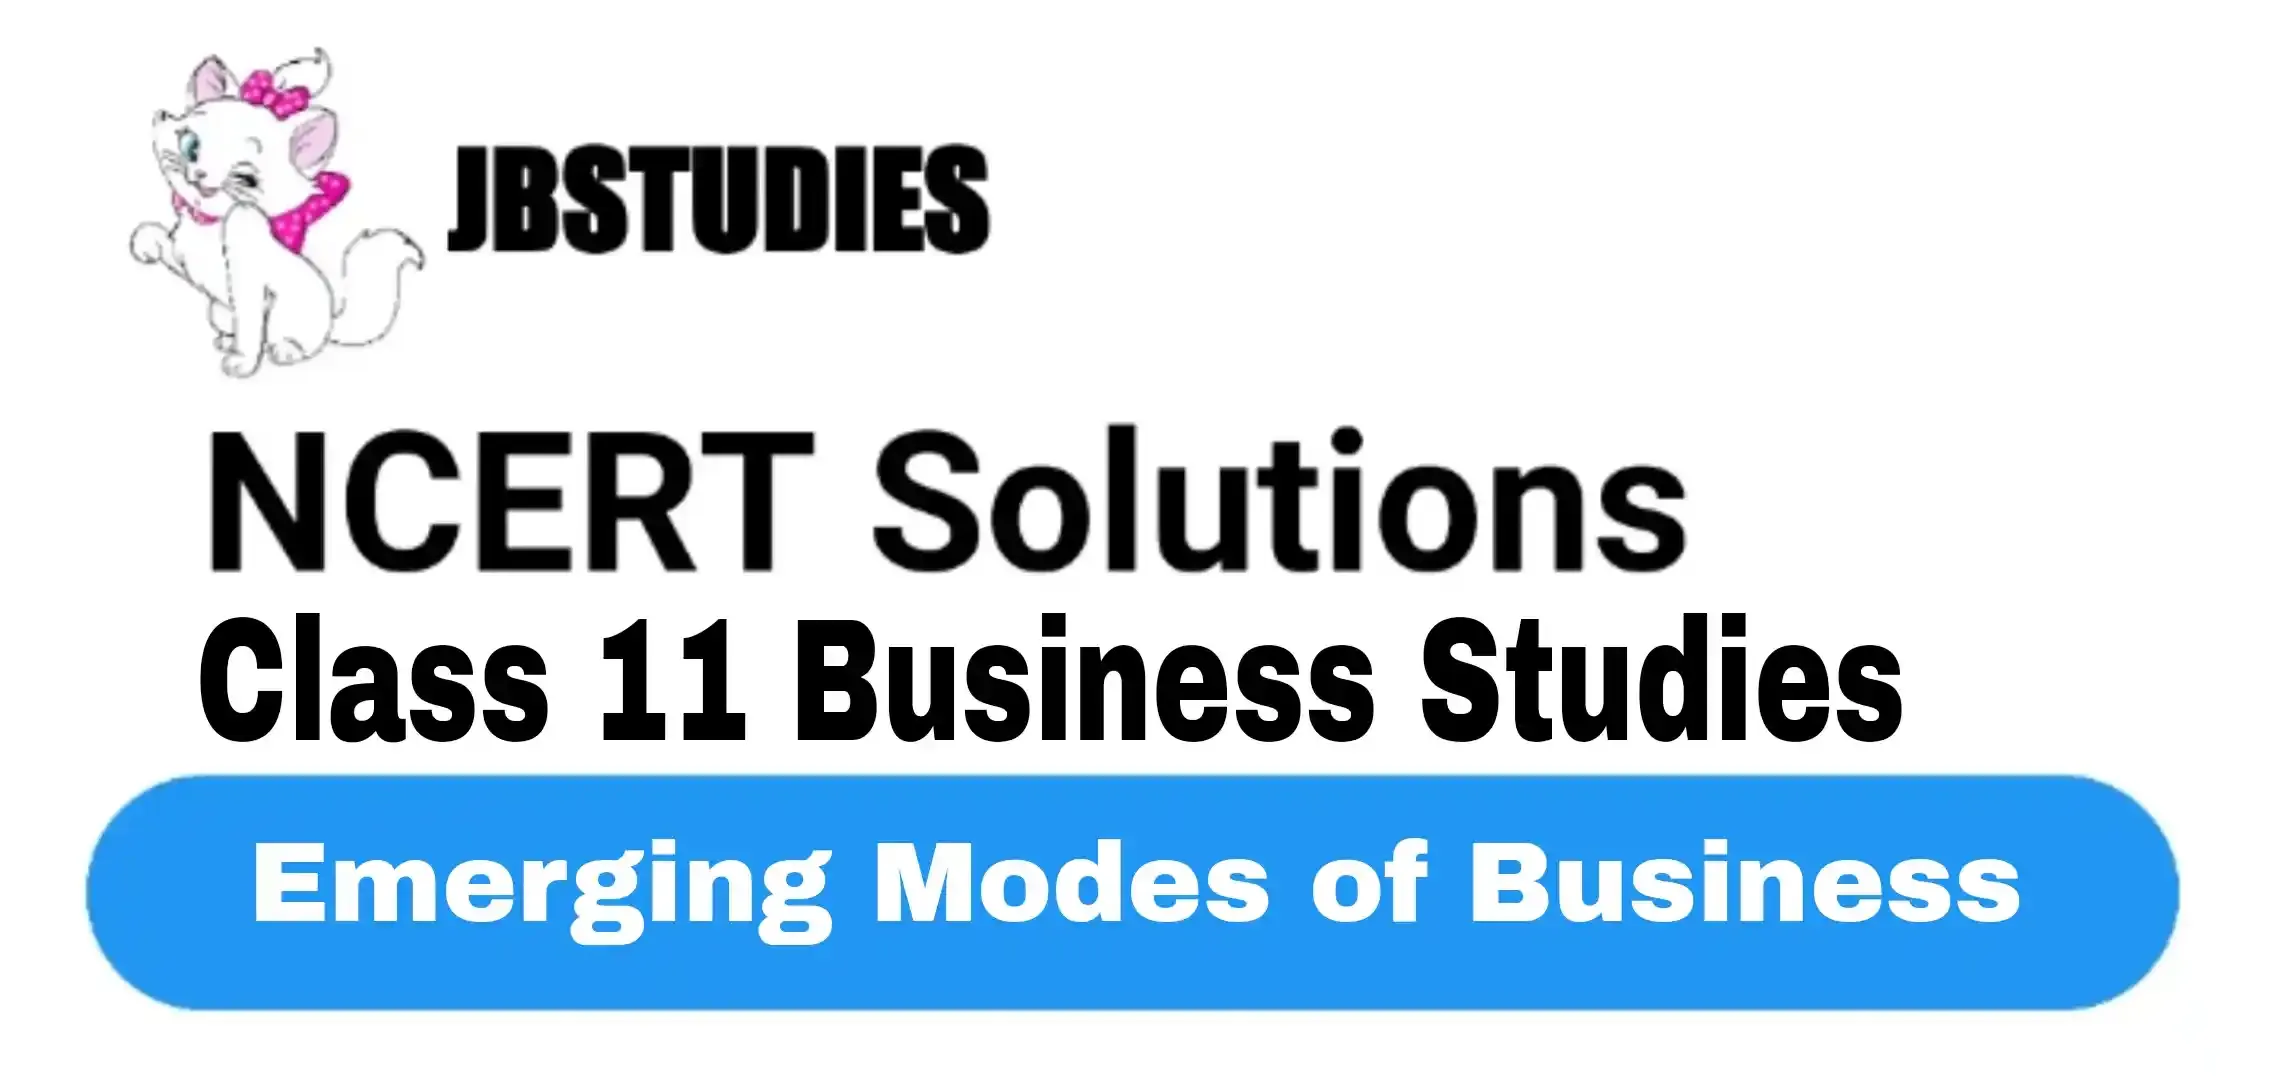 Solutions Class 11 Business Studies Chapter -5 (Emerging Modes of Business)